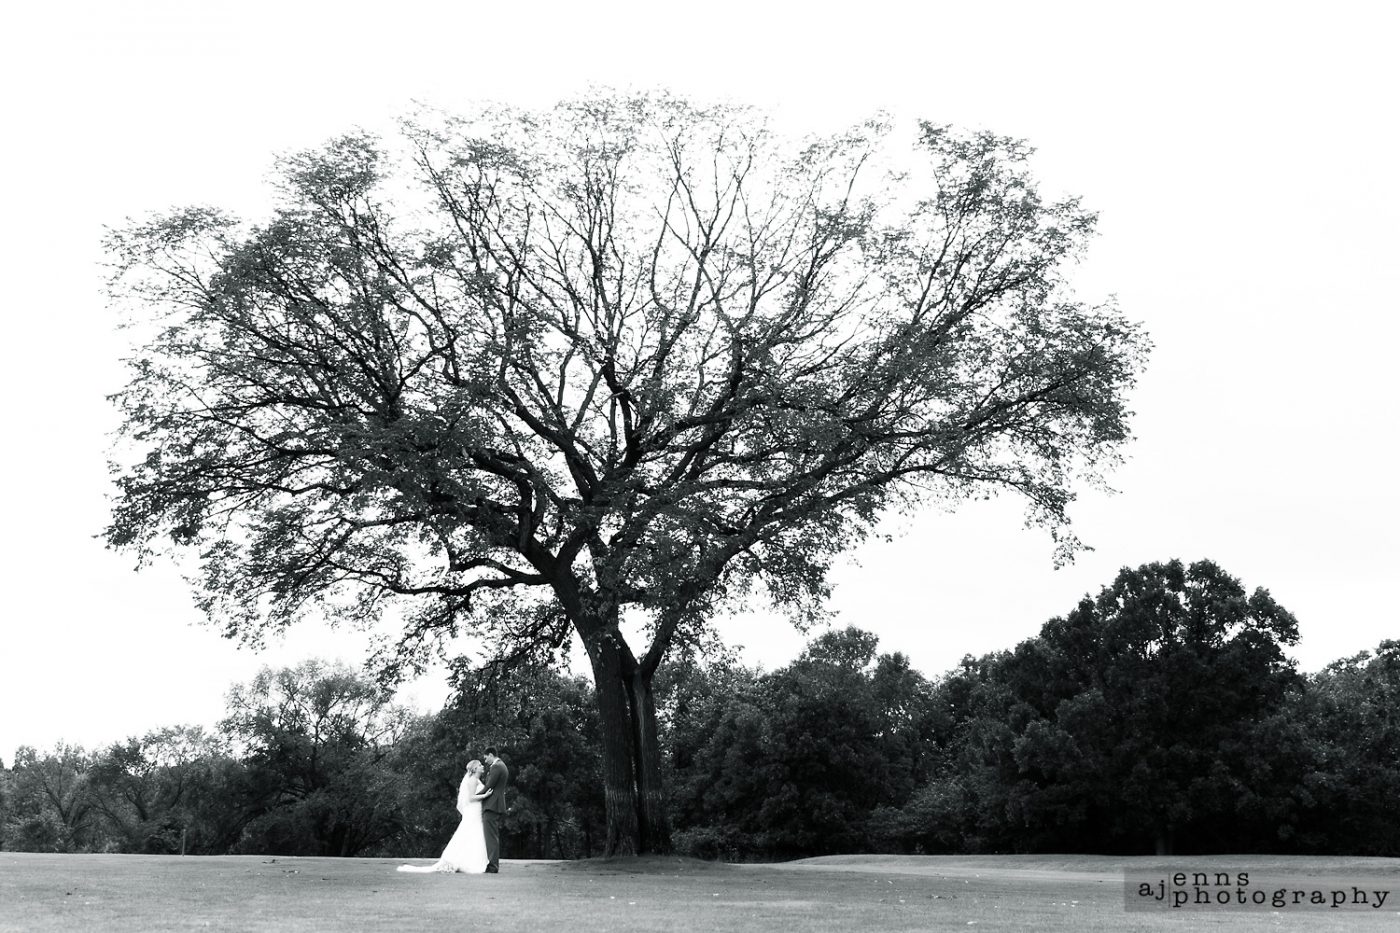 The great tree on the fairway at the St. Boniface Golf Club